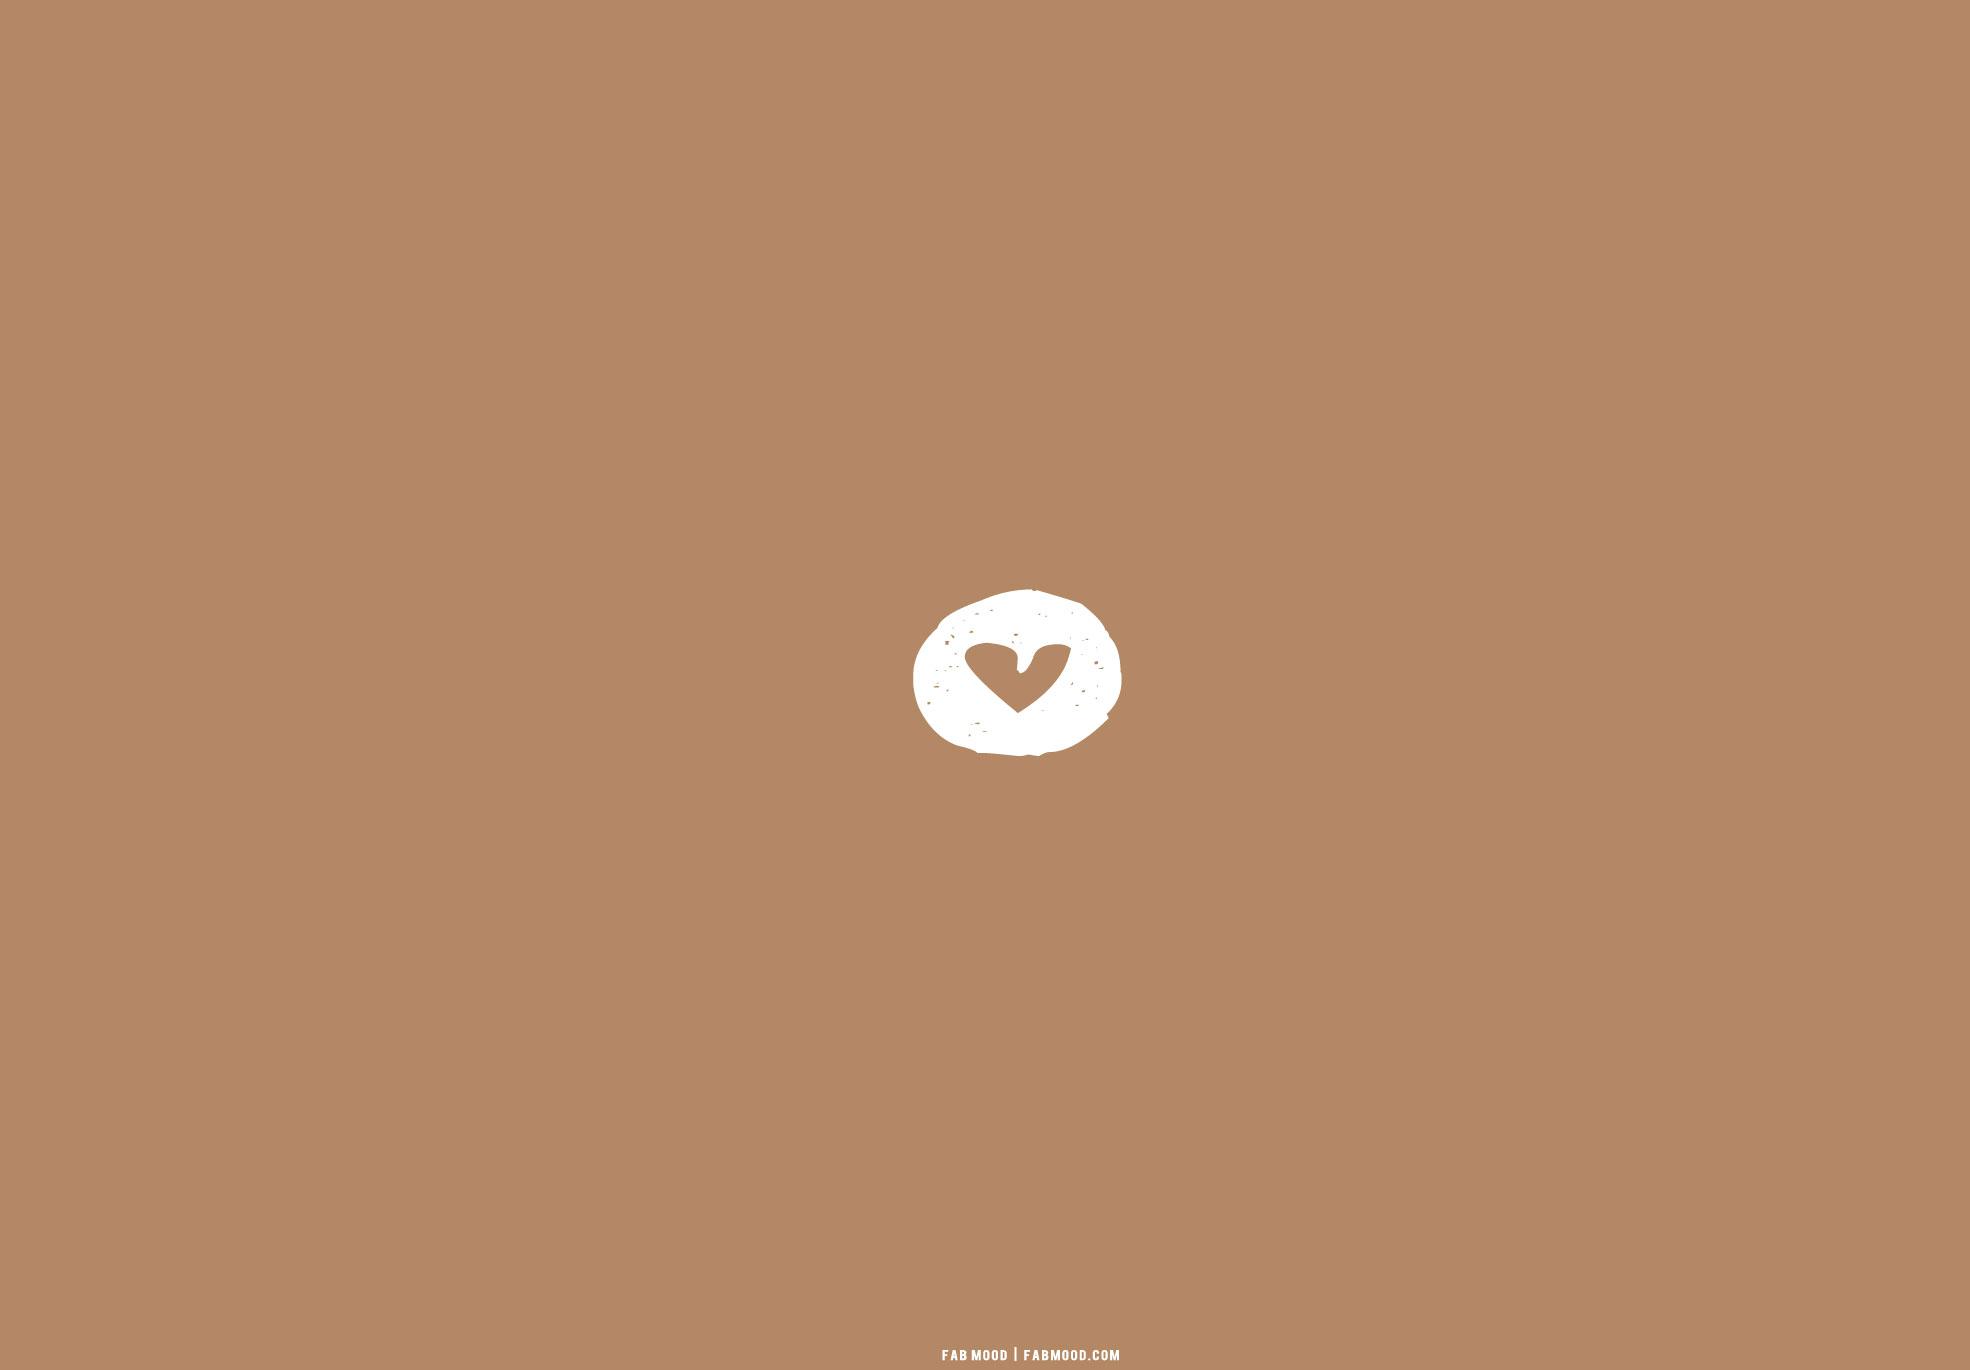 Brown Aesthetic Wallpaper For Laptop Heart Cut Out